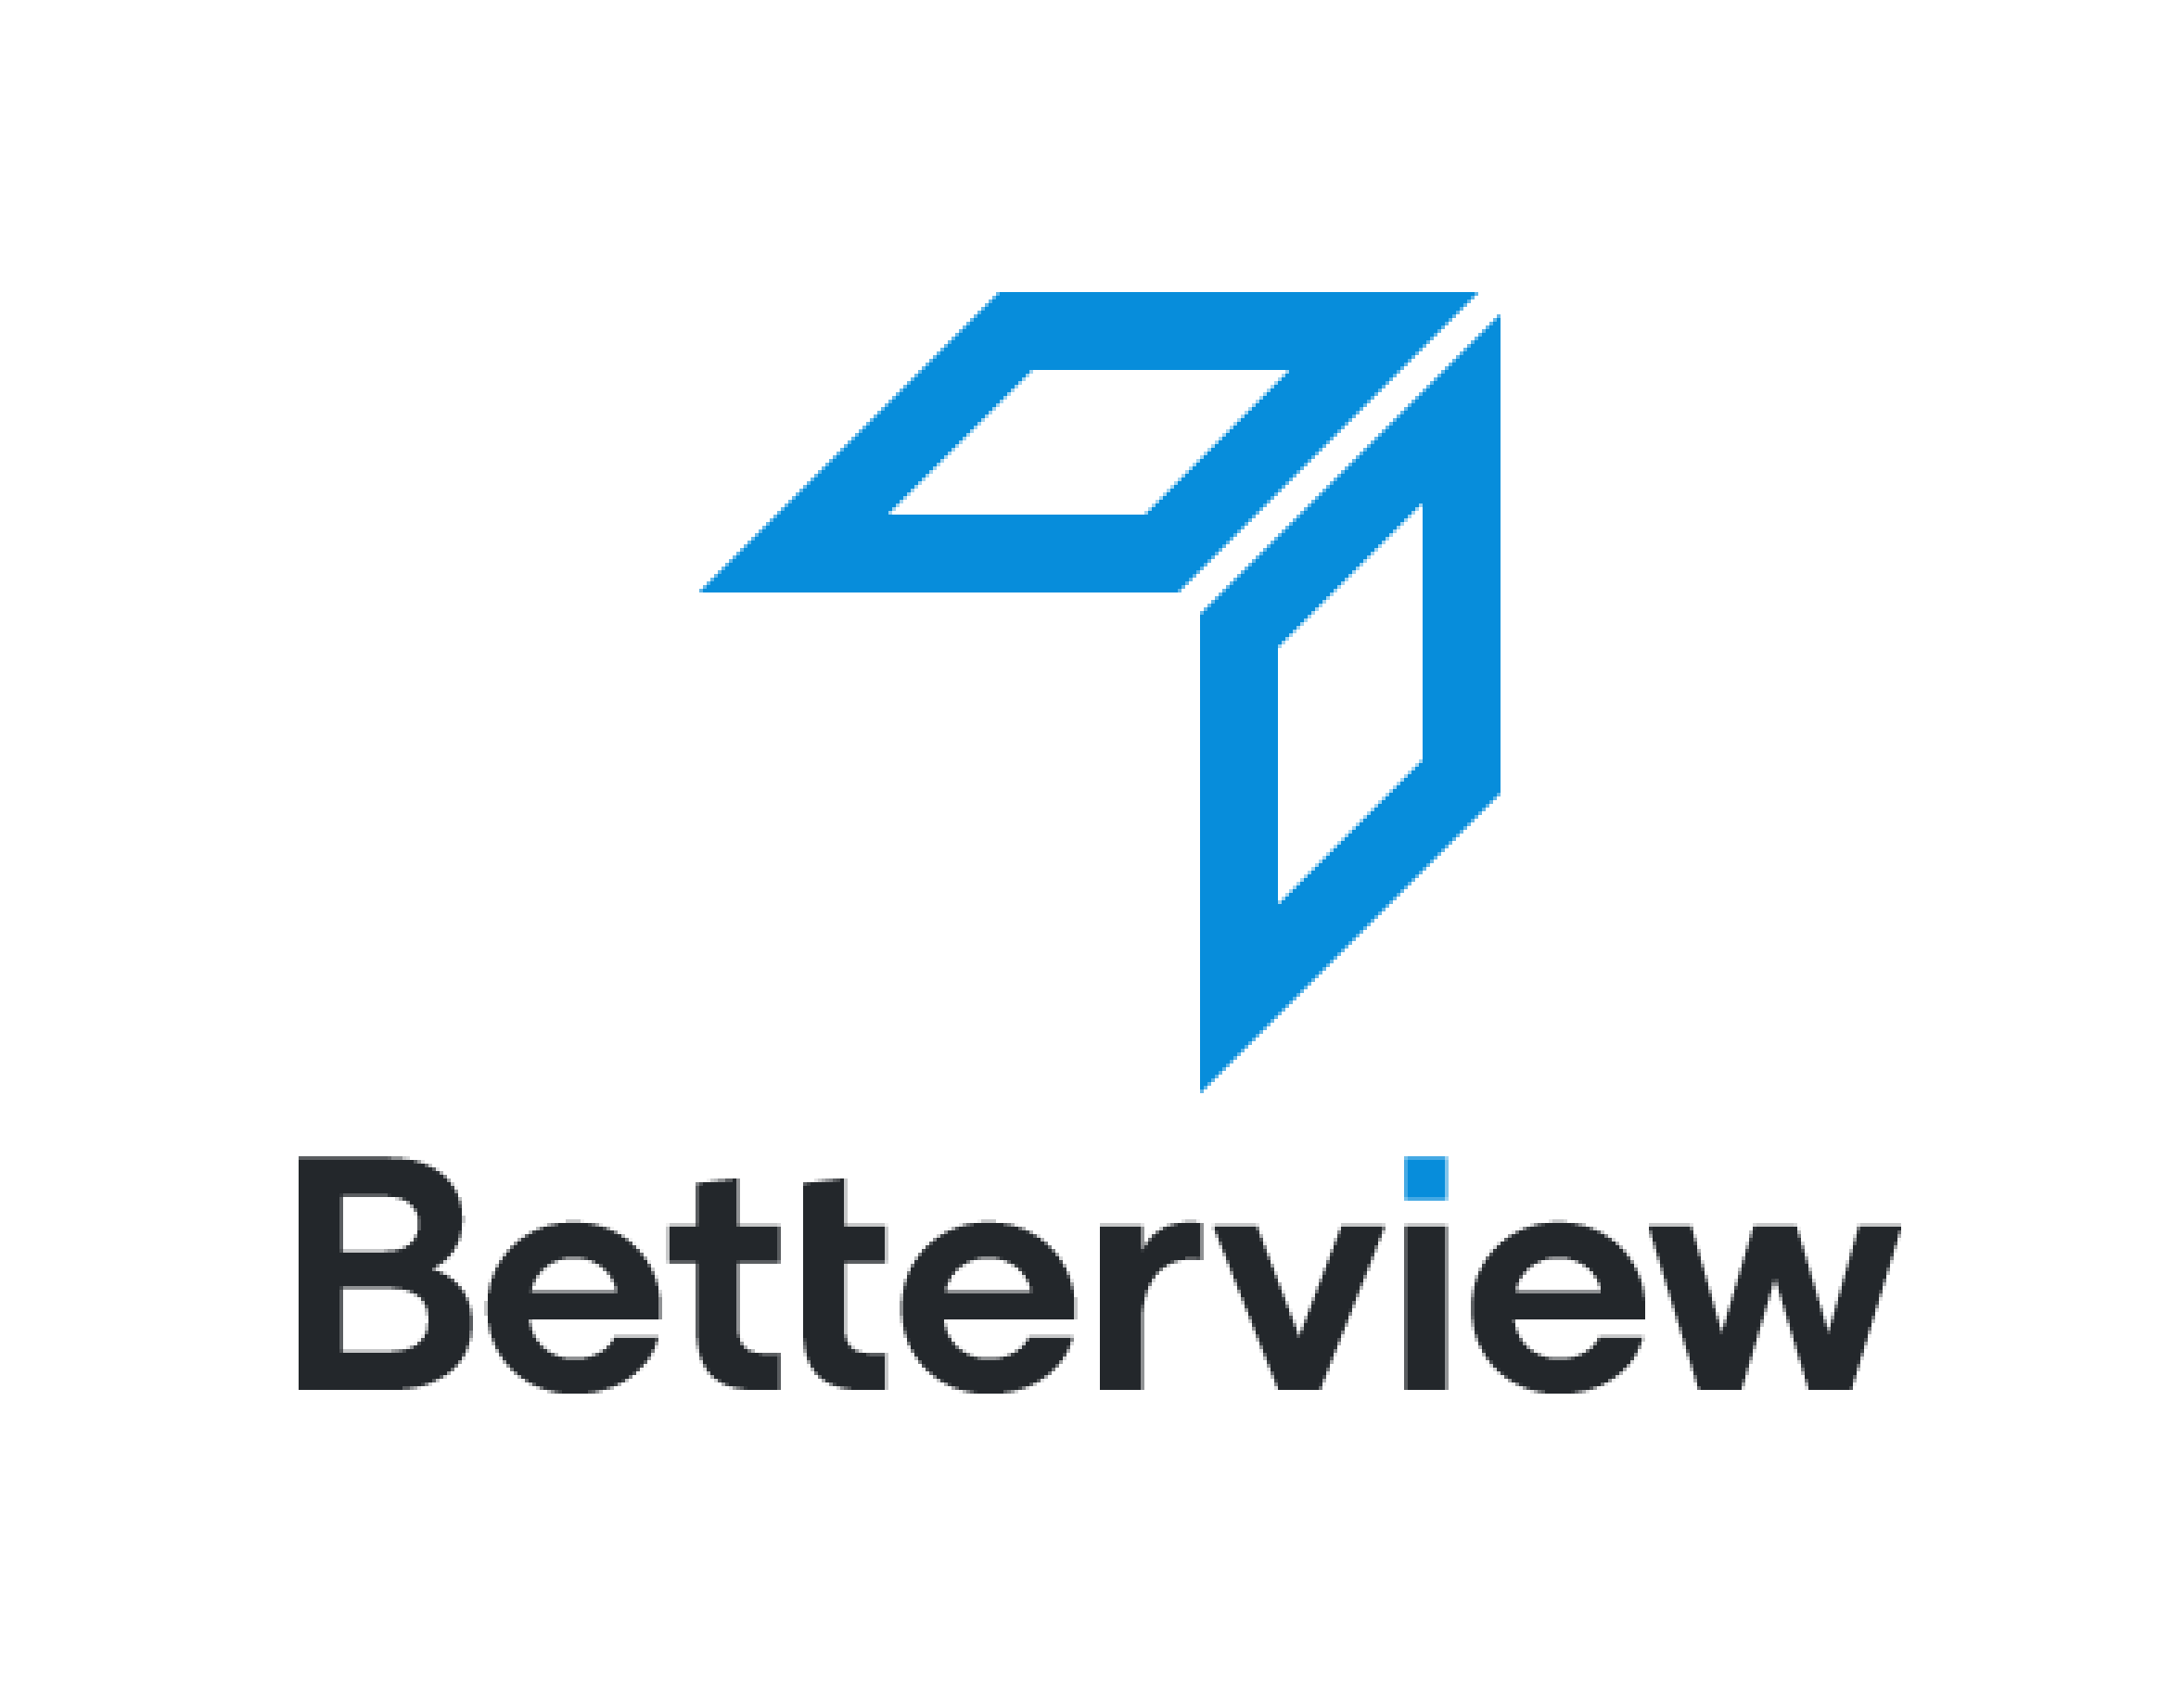 Conifer Insurance Company Partners with InsurTech AI Startup Betterview to Deliver Data & Analytics on Commercial Buildings and Properties